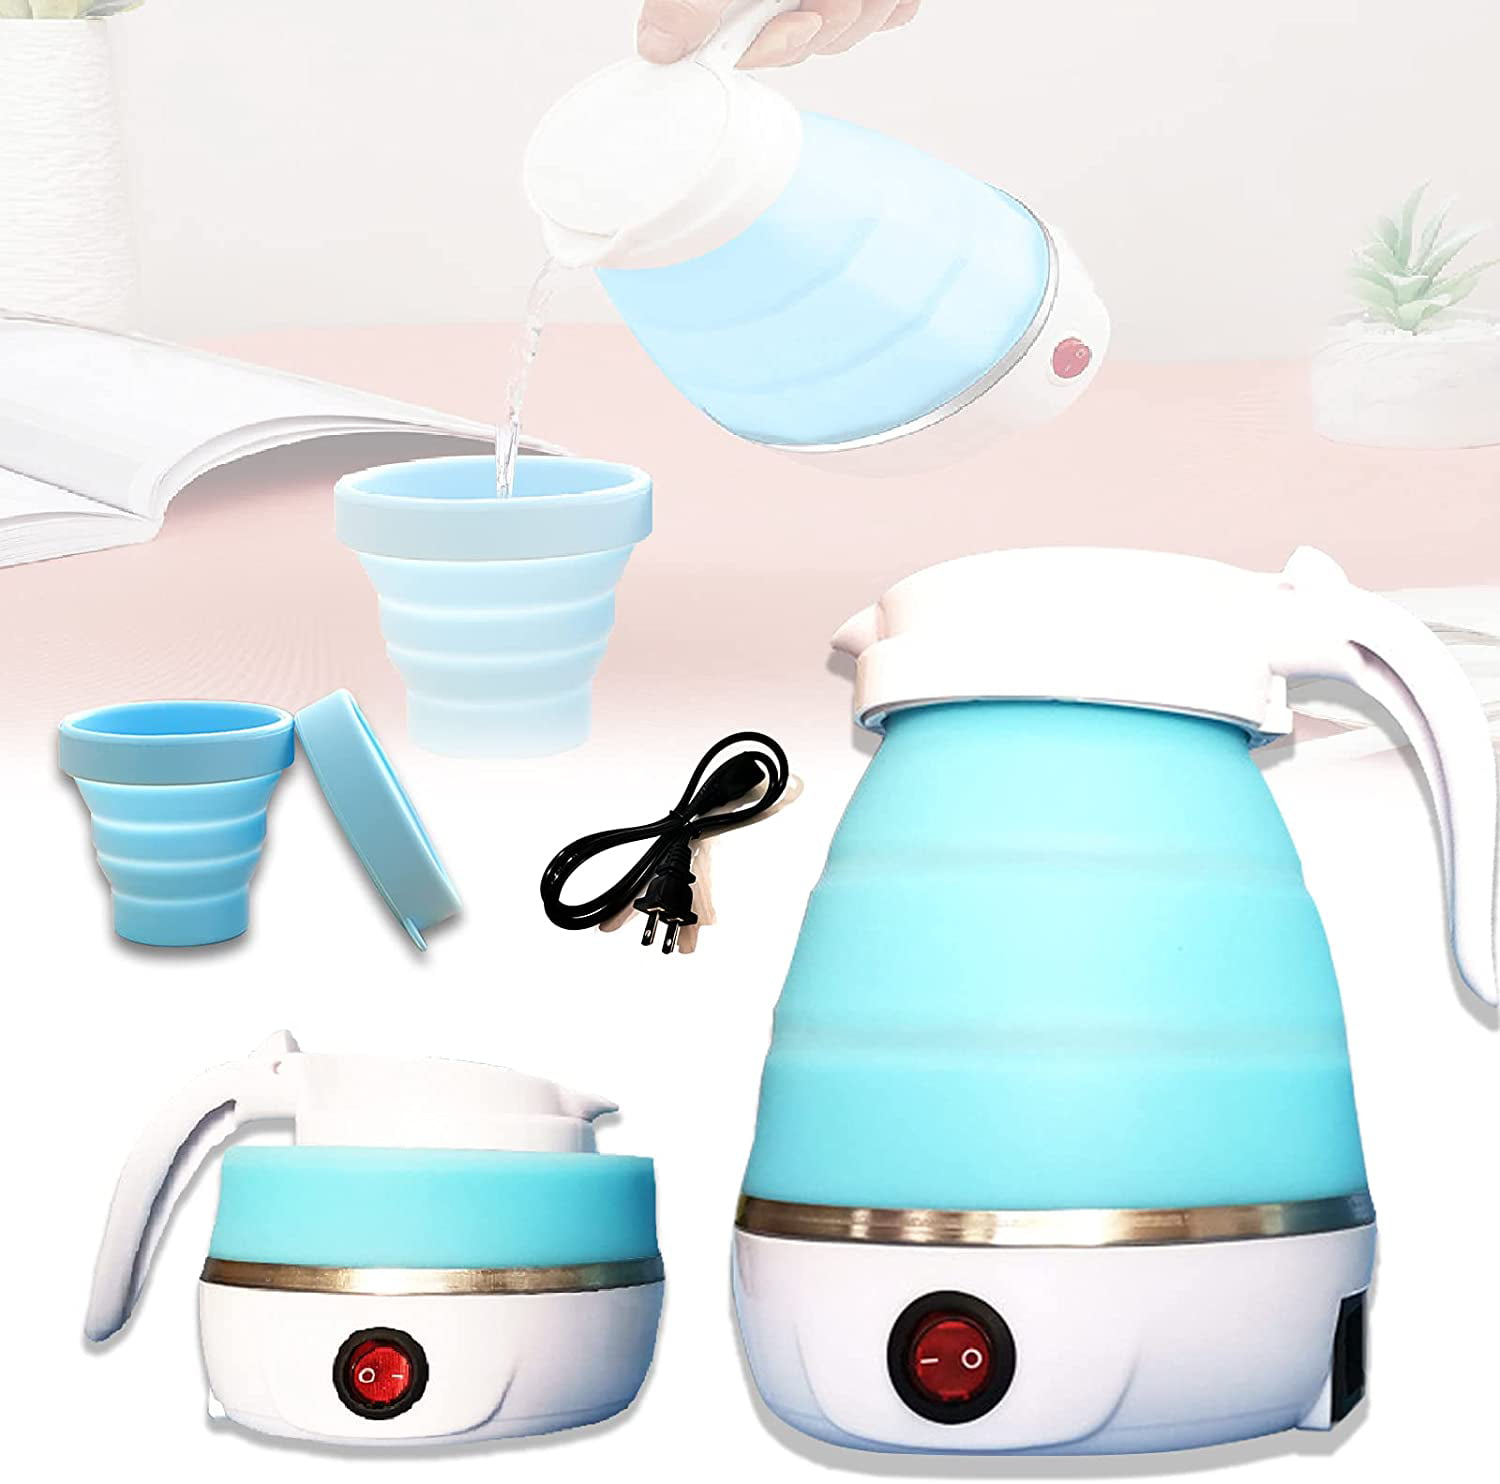 Food Grade Silicone Travel Foldable Collapsible Kettle Boiler Coffee Tea Pots 